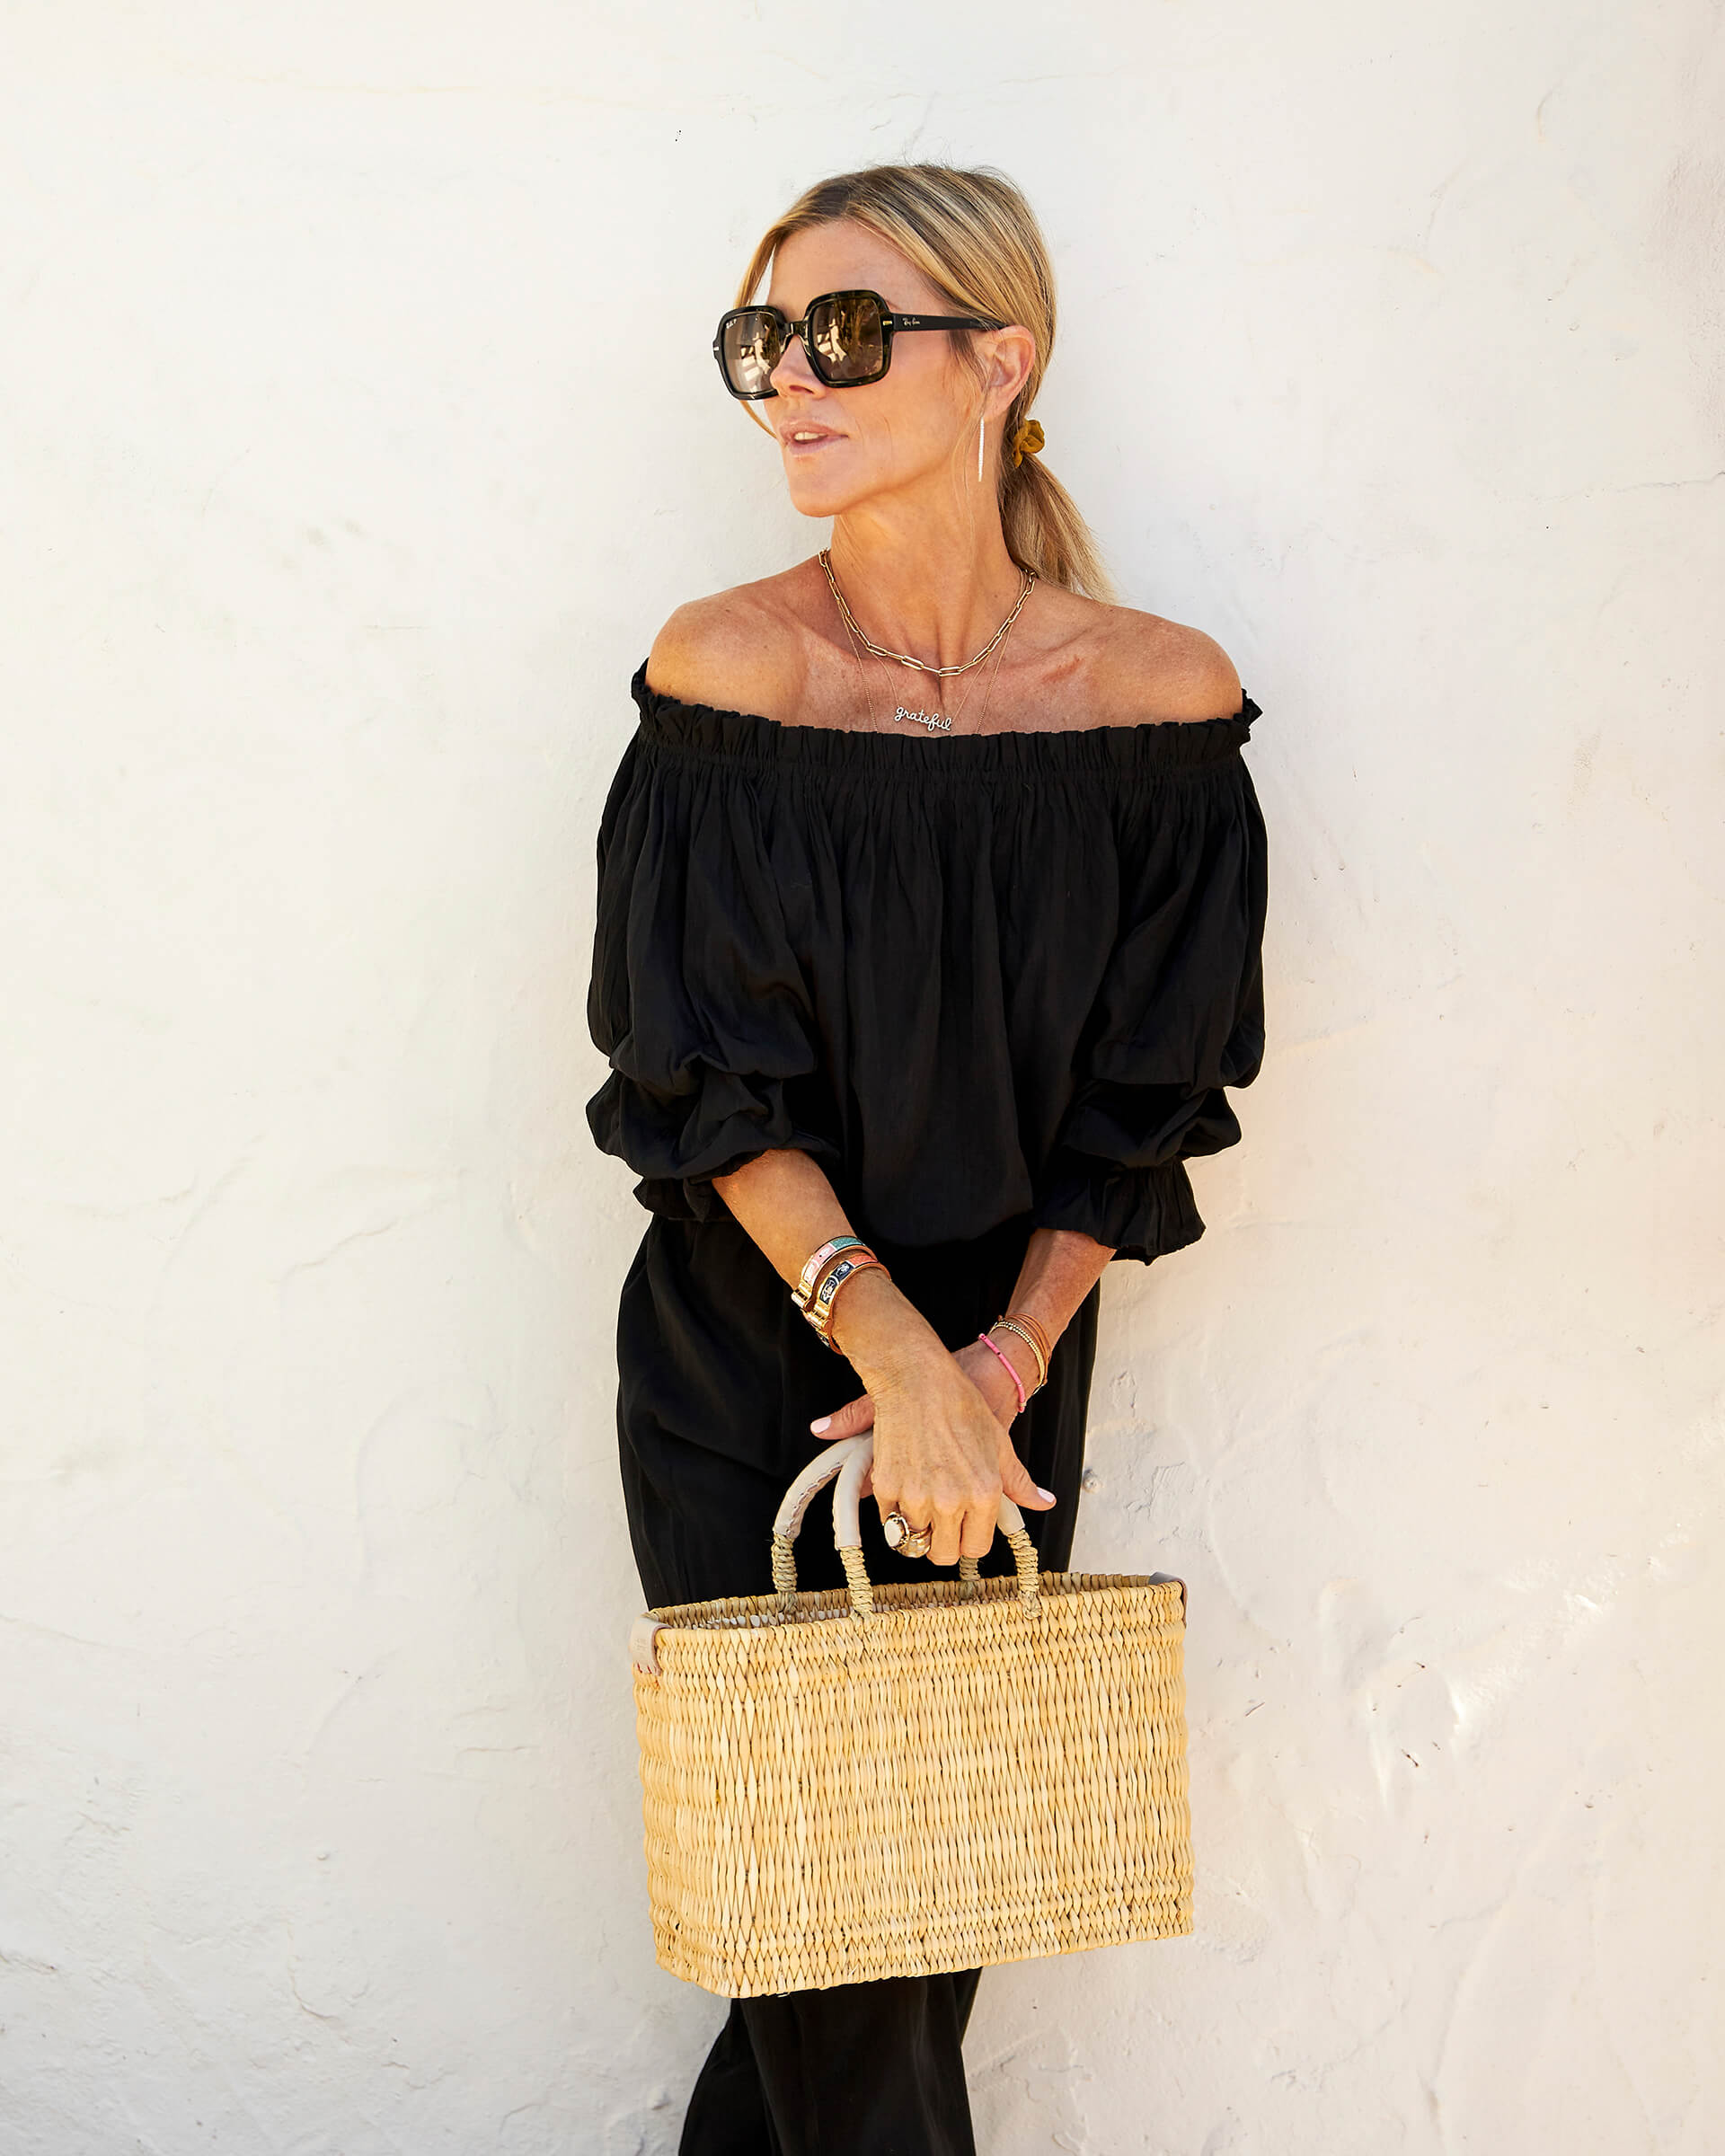 blonde female holding small straw basket with a neutral colored handle leaning against white wall